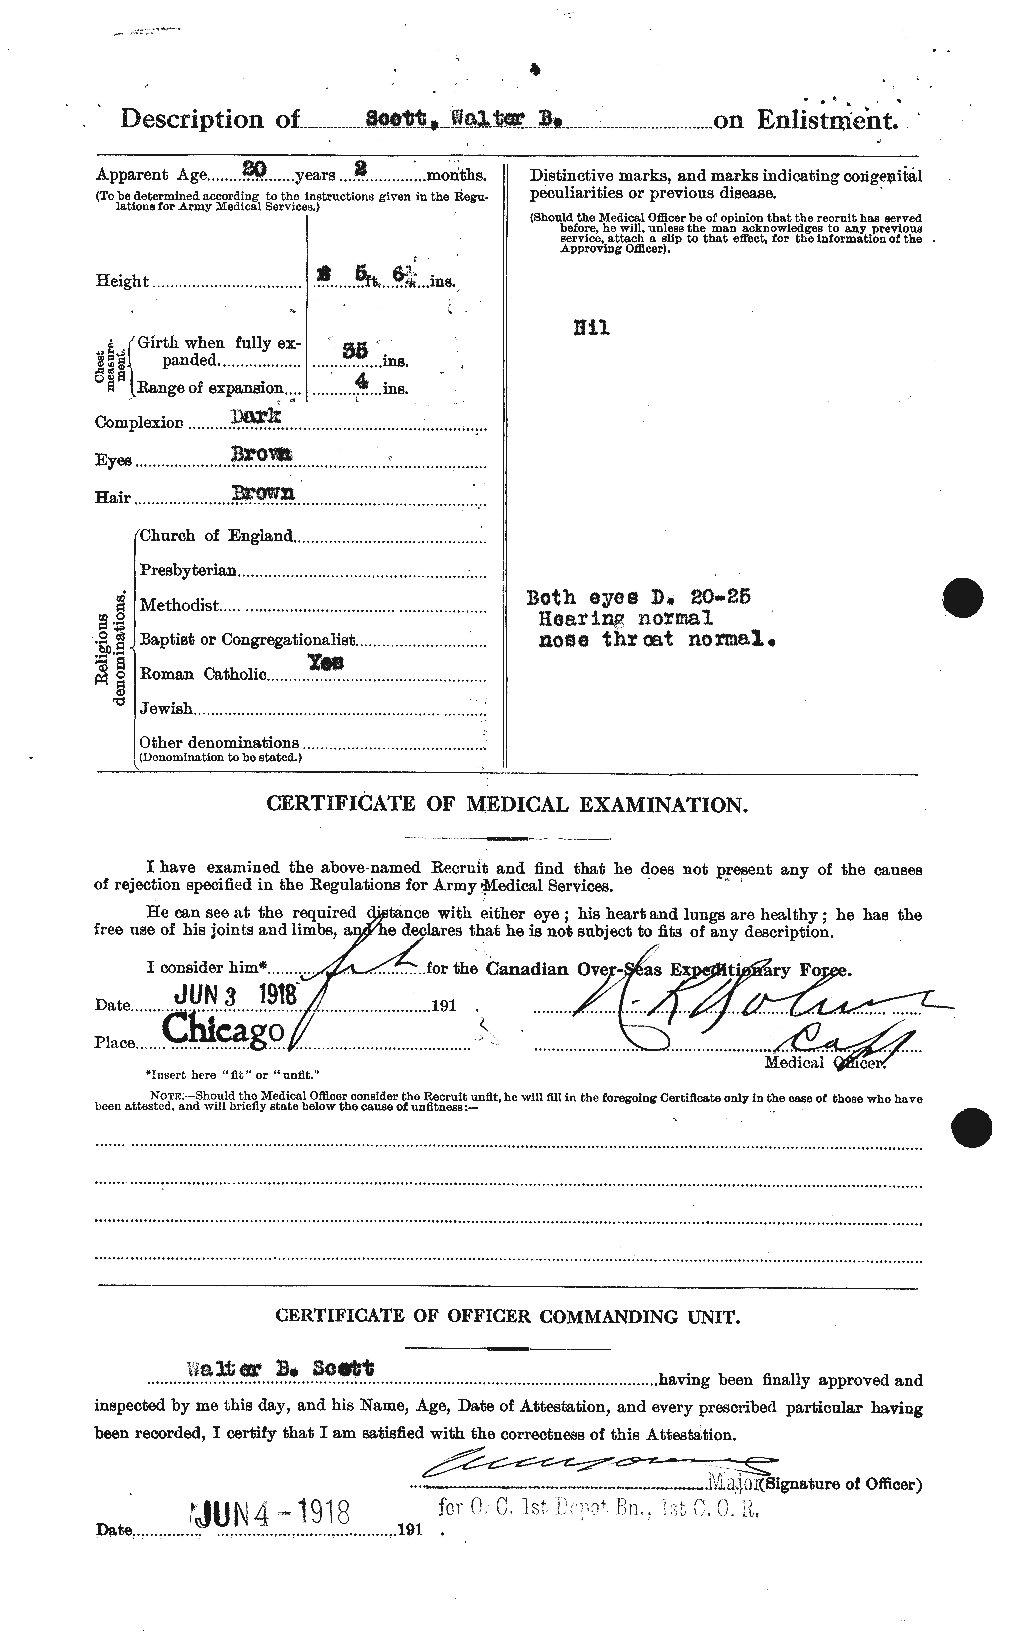 Personnel Records of the First World War - CEF 088001b